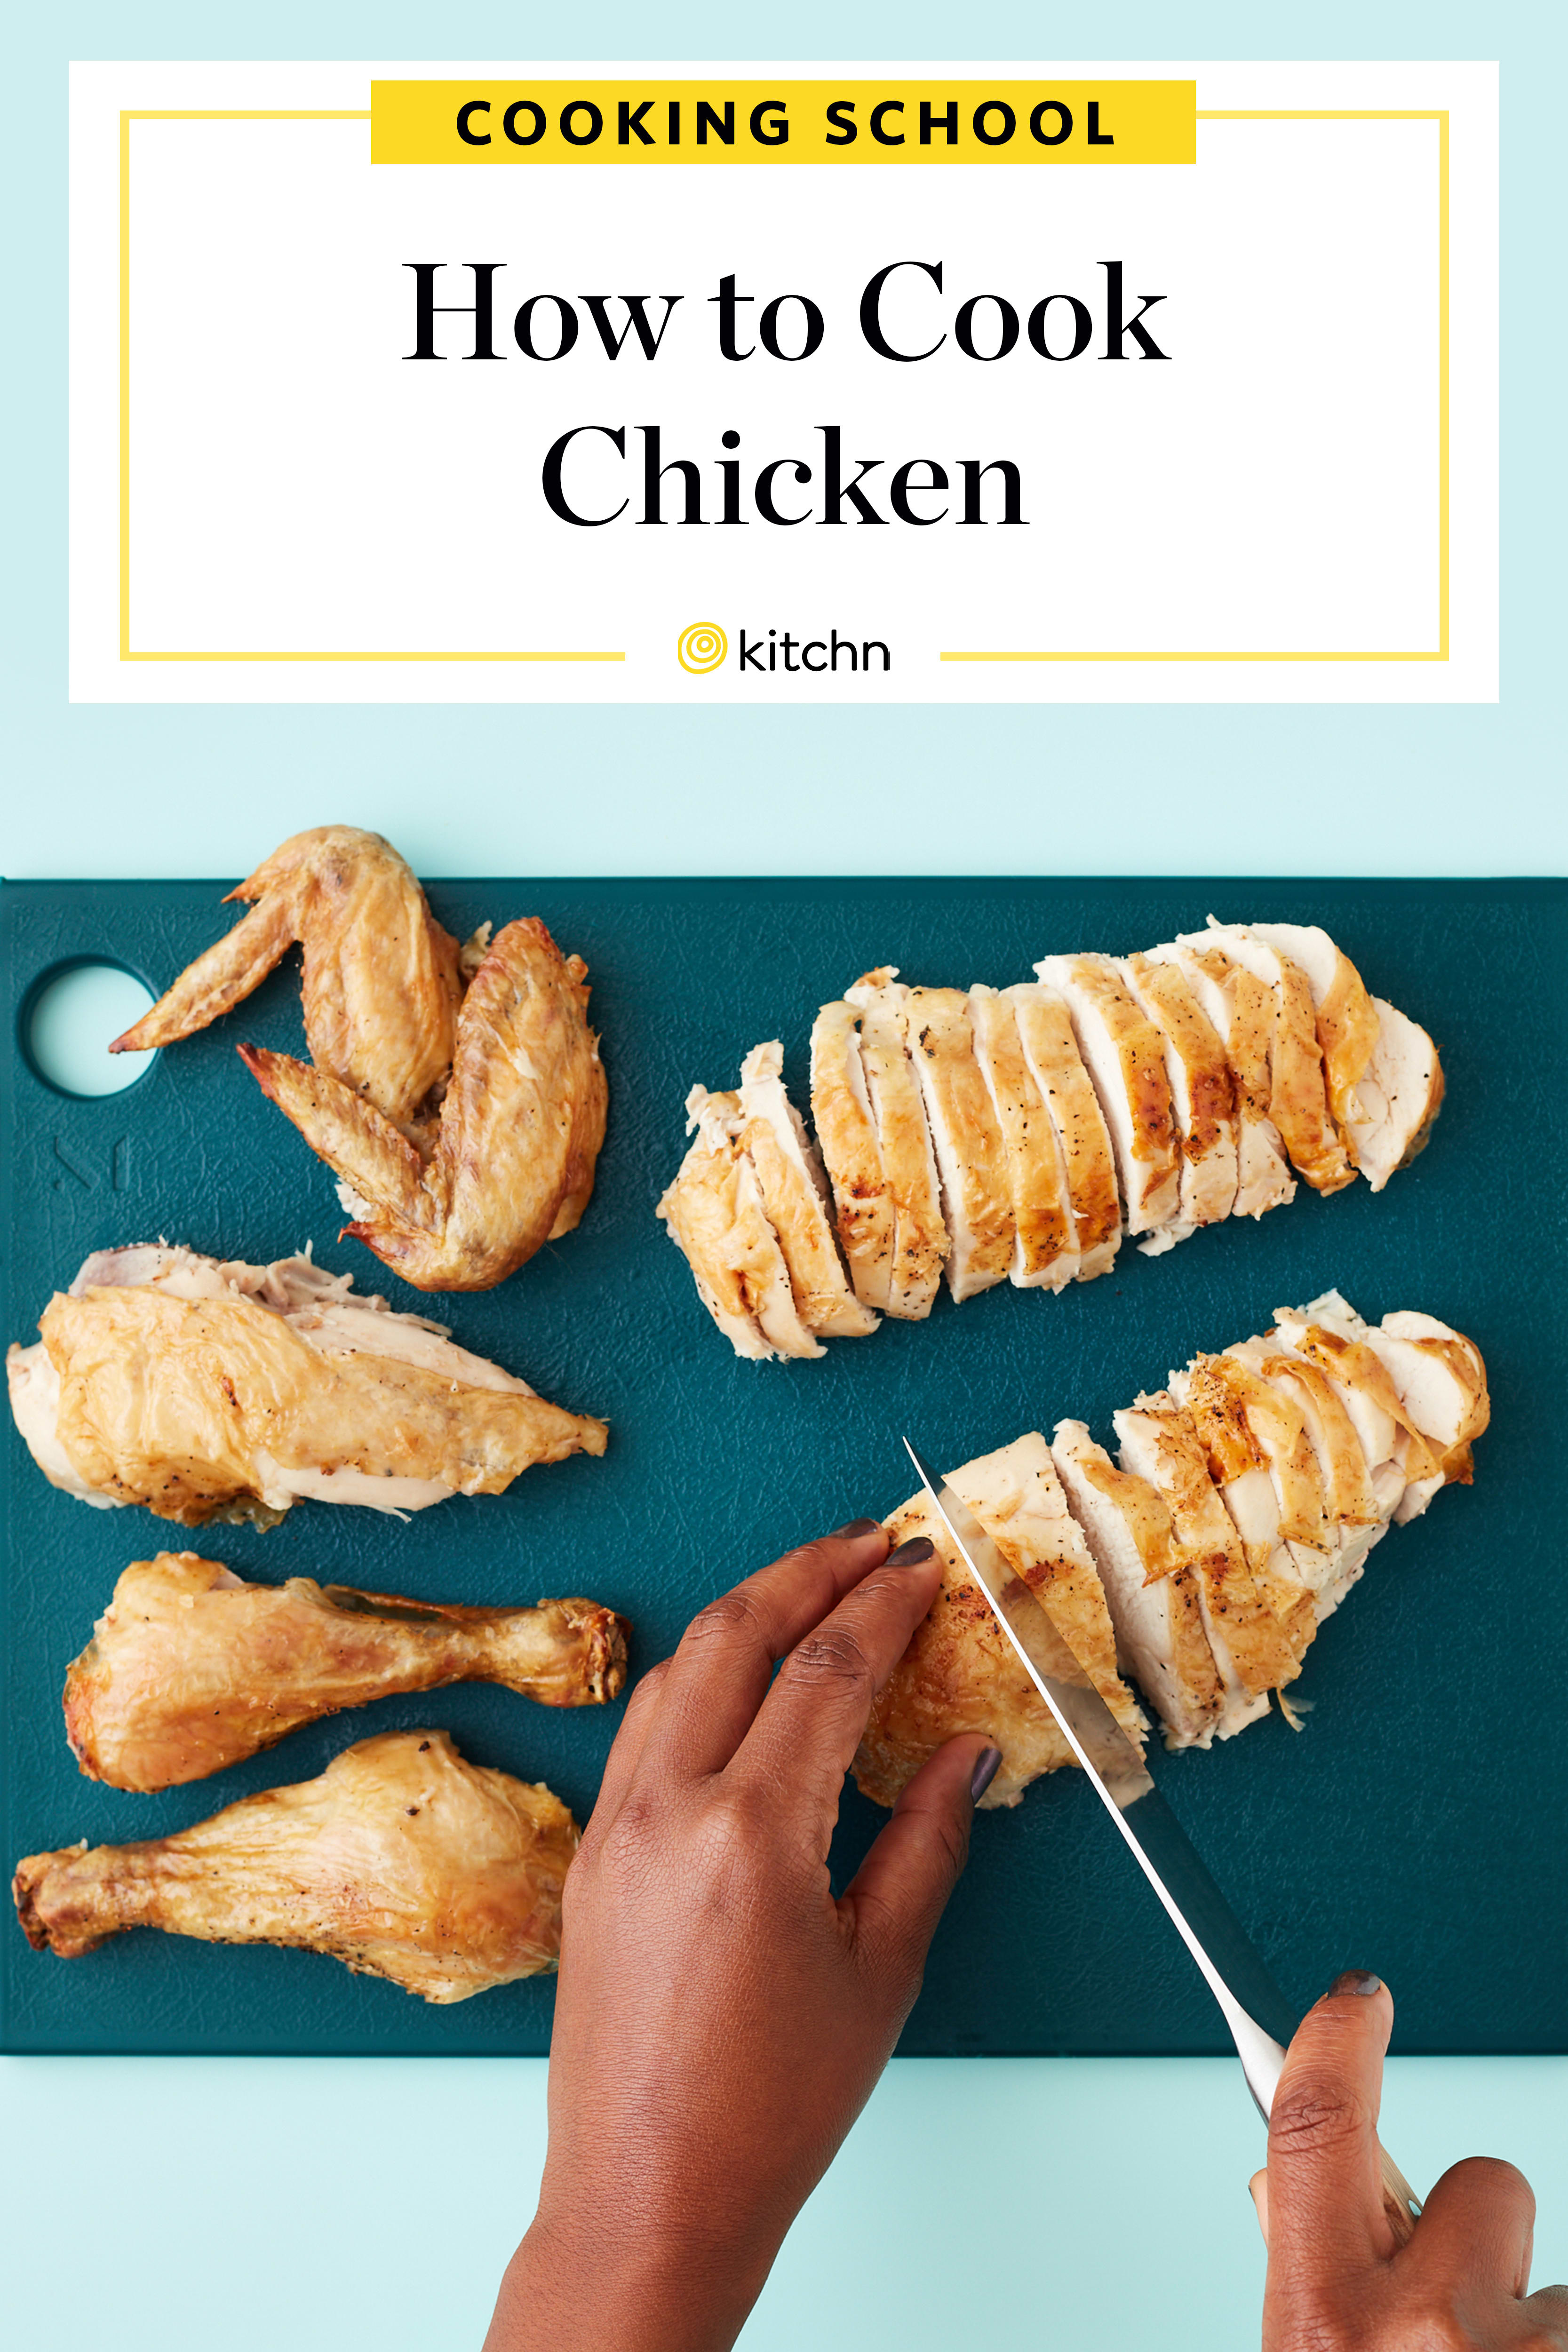 At What Temperature Do You Bake Chicken, Cooking School